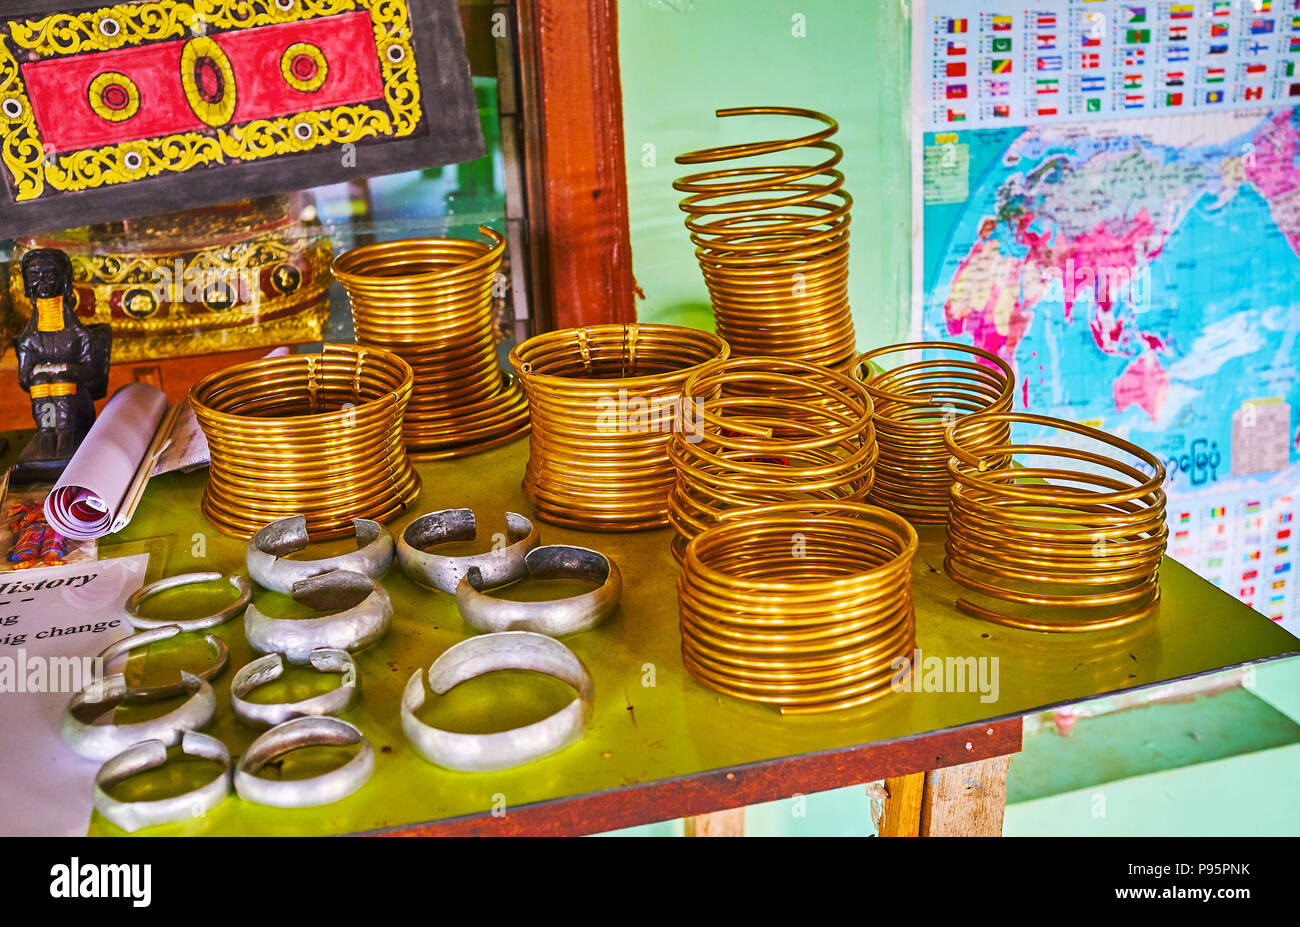 INLE LAKE, MYANMAR - FEBRUARY 18, 2018:  The exhibition in authentic workshop with examples of brass neck rings of Padaung Kayan women, also famous as Stock Photo